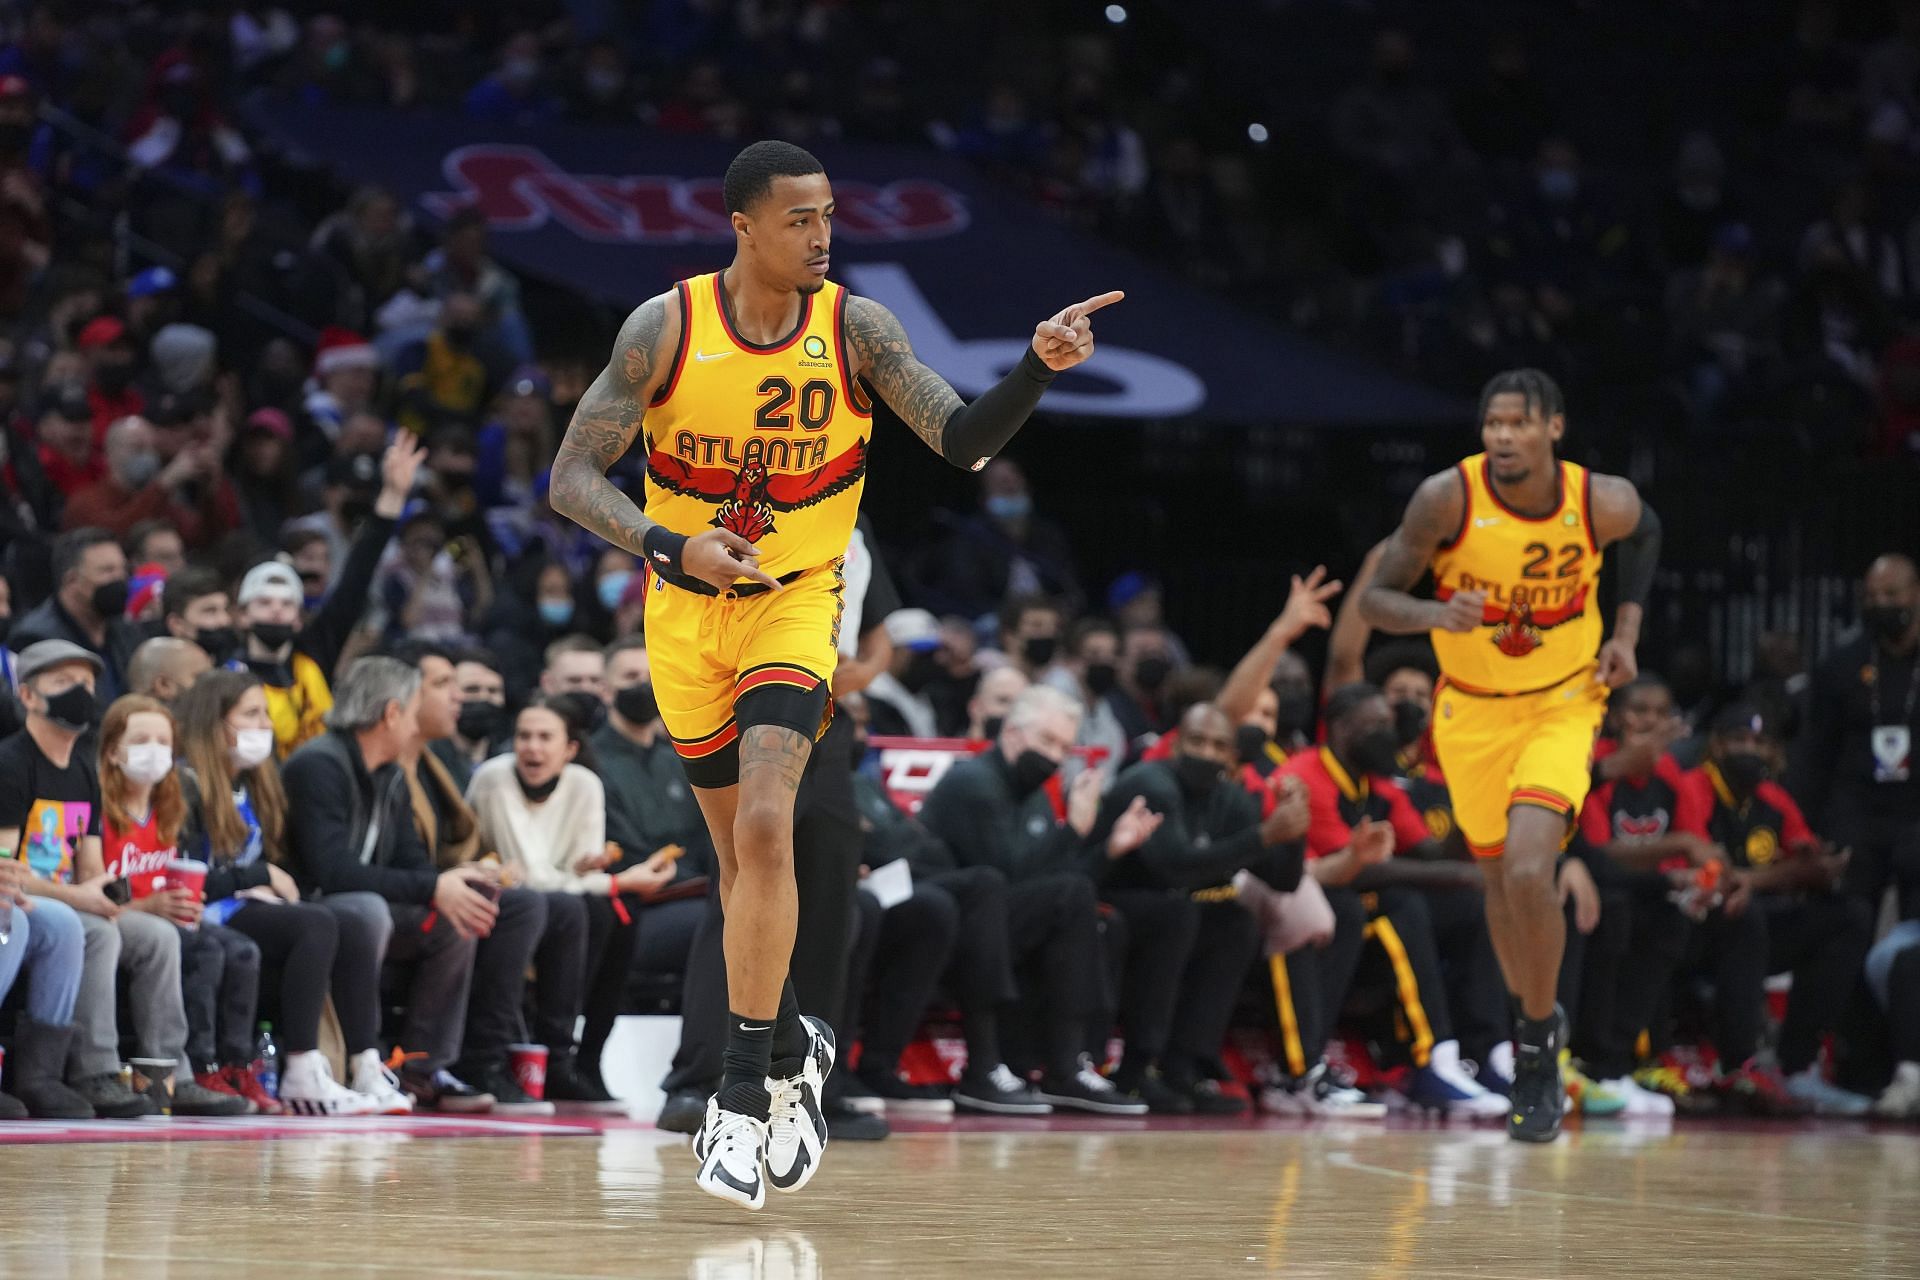 John Collins No. 20 of the Atlanta Hawks reacts against the Philadelphia 76ers in the first half at the Wells Fargo Center.